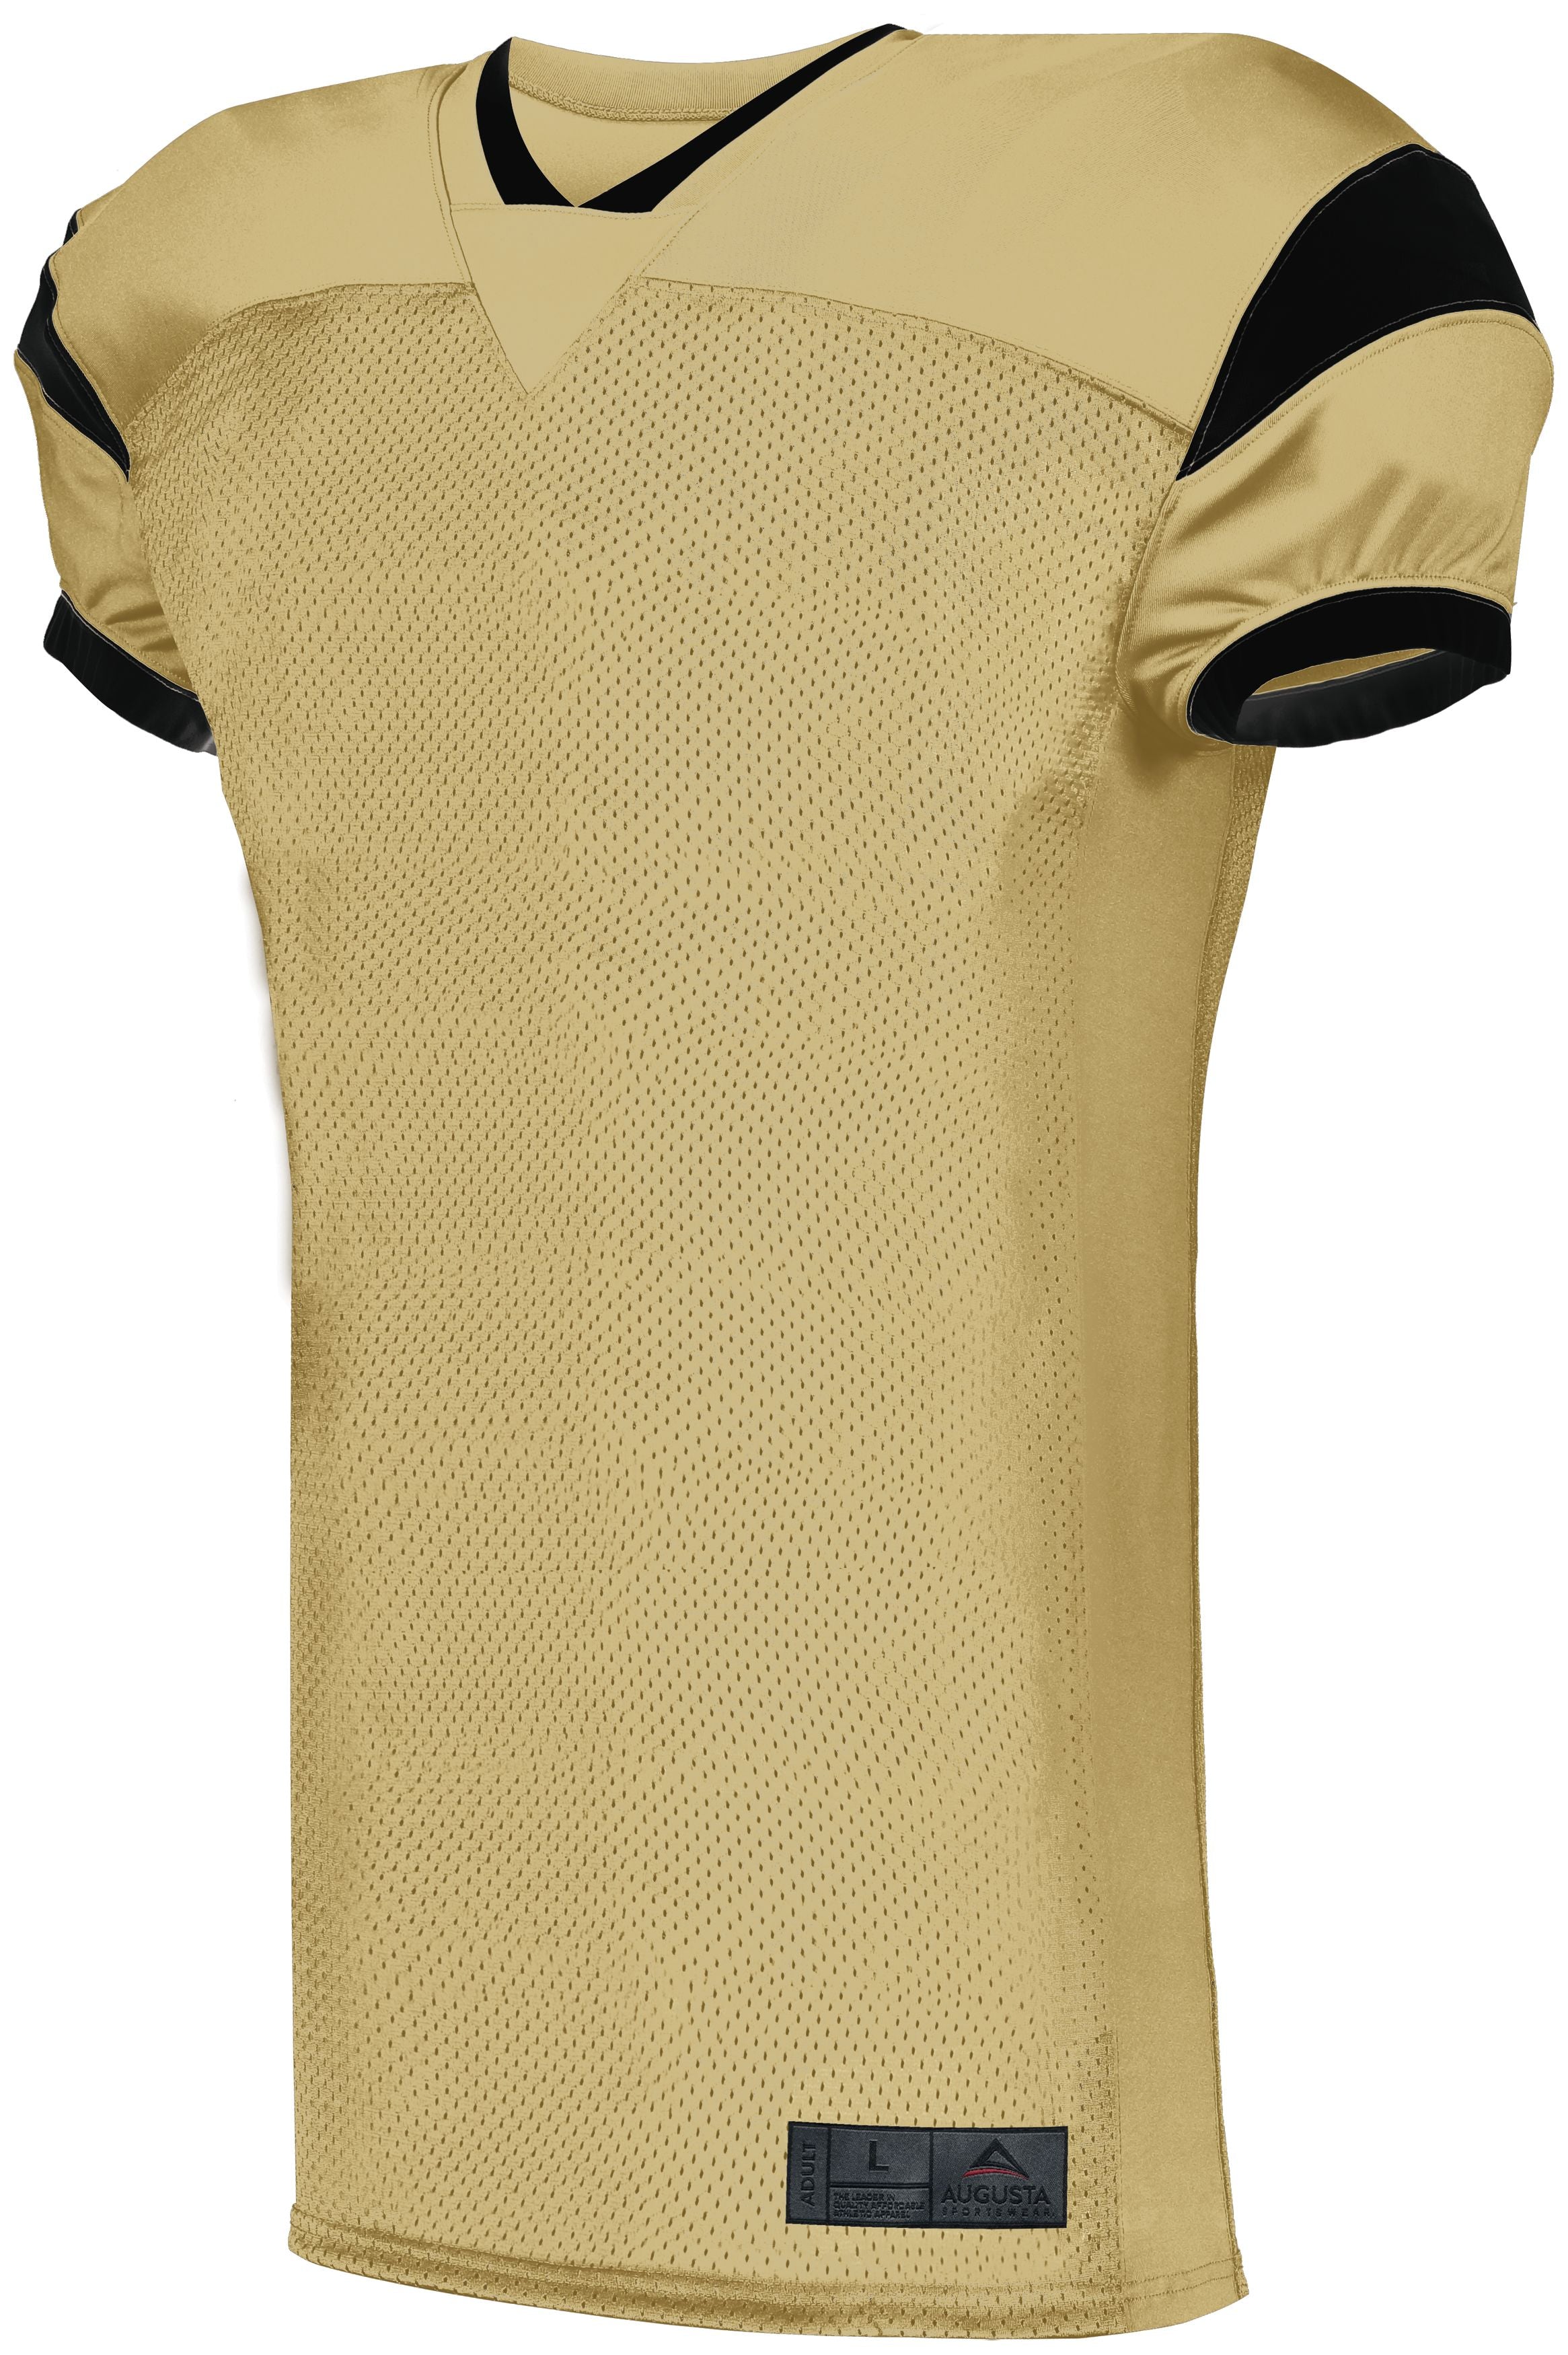 Augusta Sportswear Slant Football Jersey in Vegas Gold/Black  -Part of the Adult, Adult-Jersey, Augusta-Products, Football, Shirts, All-Sports, All-Sports-1 product lines at KanaleyCreations.com